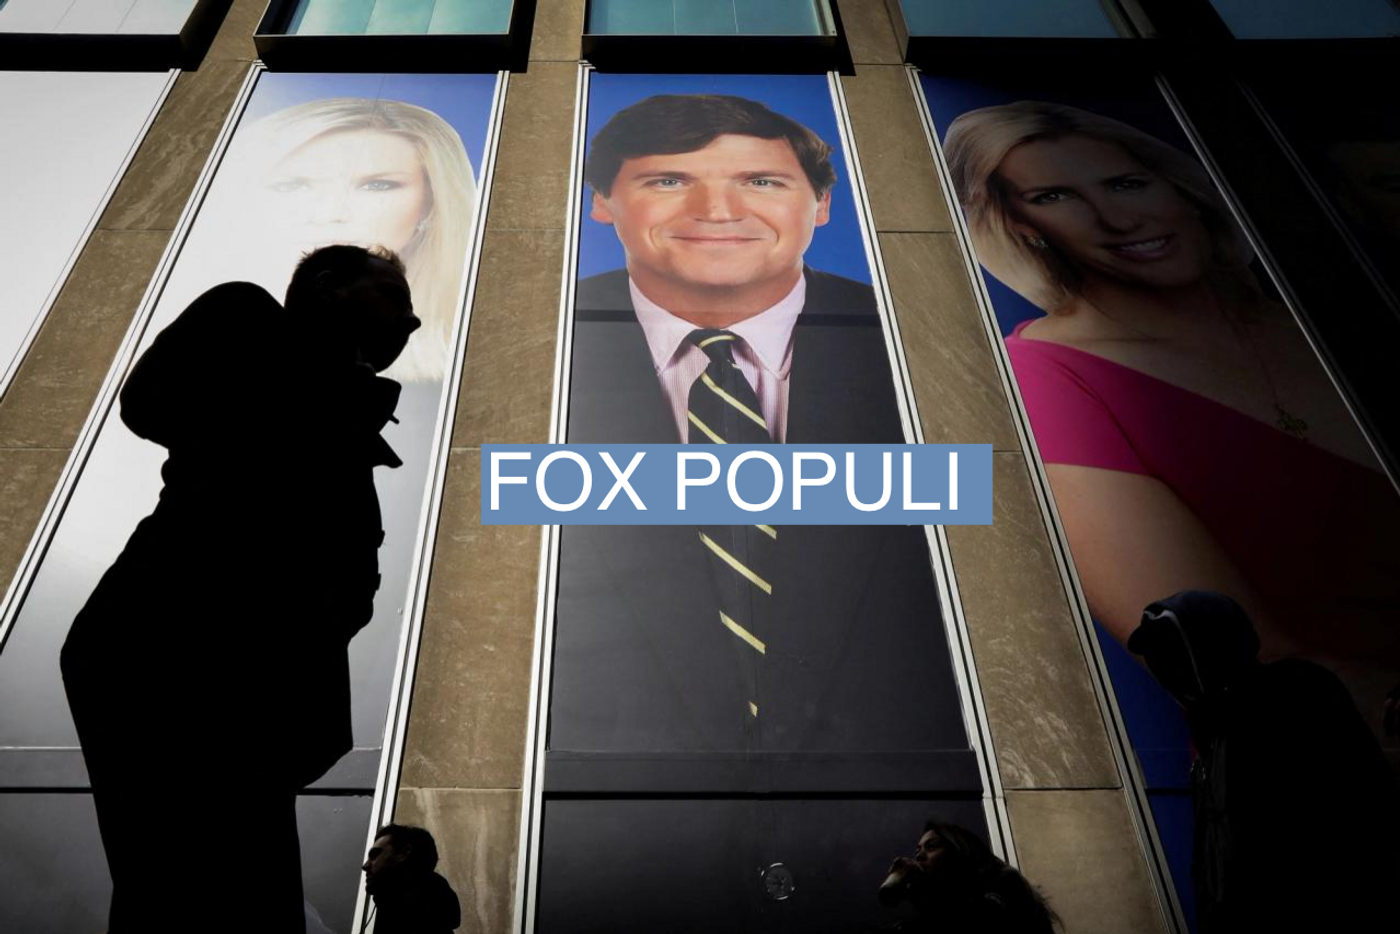 A promo of Fox News host Tucker Carlson on the News Corporation building in New York in 2019.